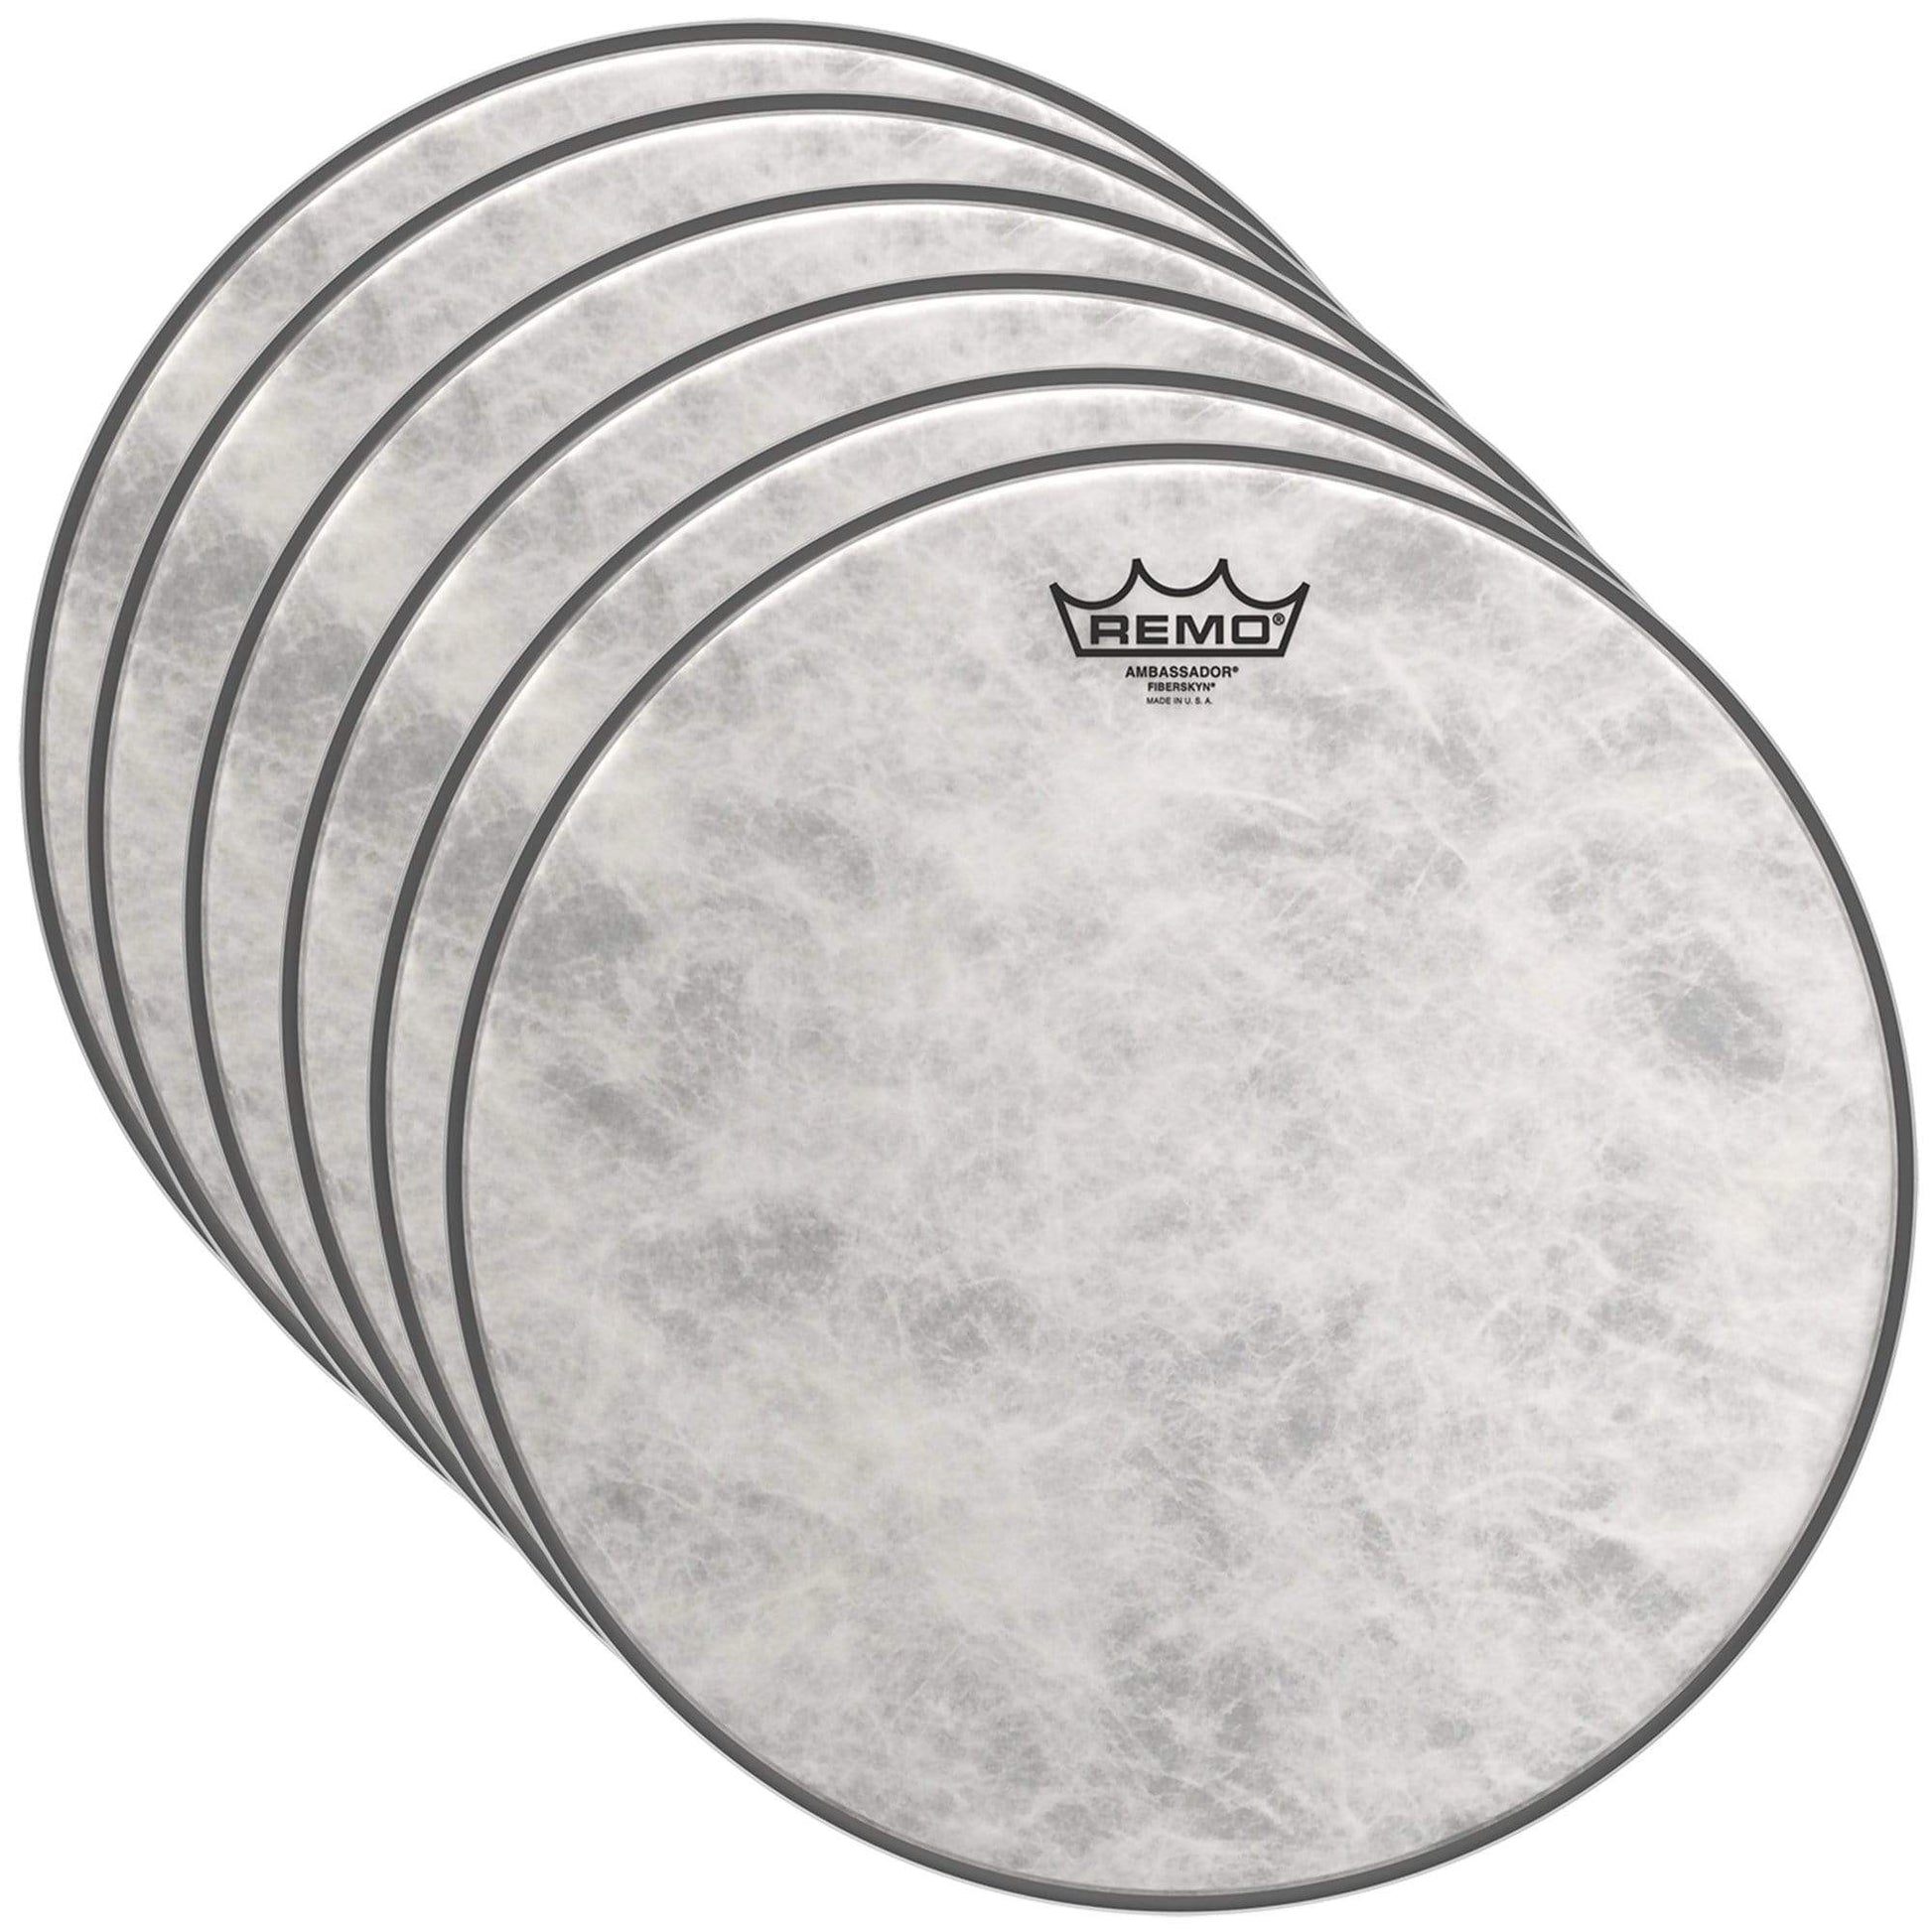 Remo 18" Ambassador Fiberskyn Drumhead (6 Pack Bundle) Drums and Percussion / Parts and Accessories / Heads